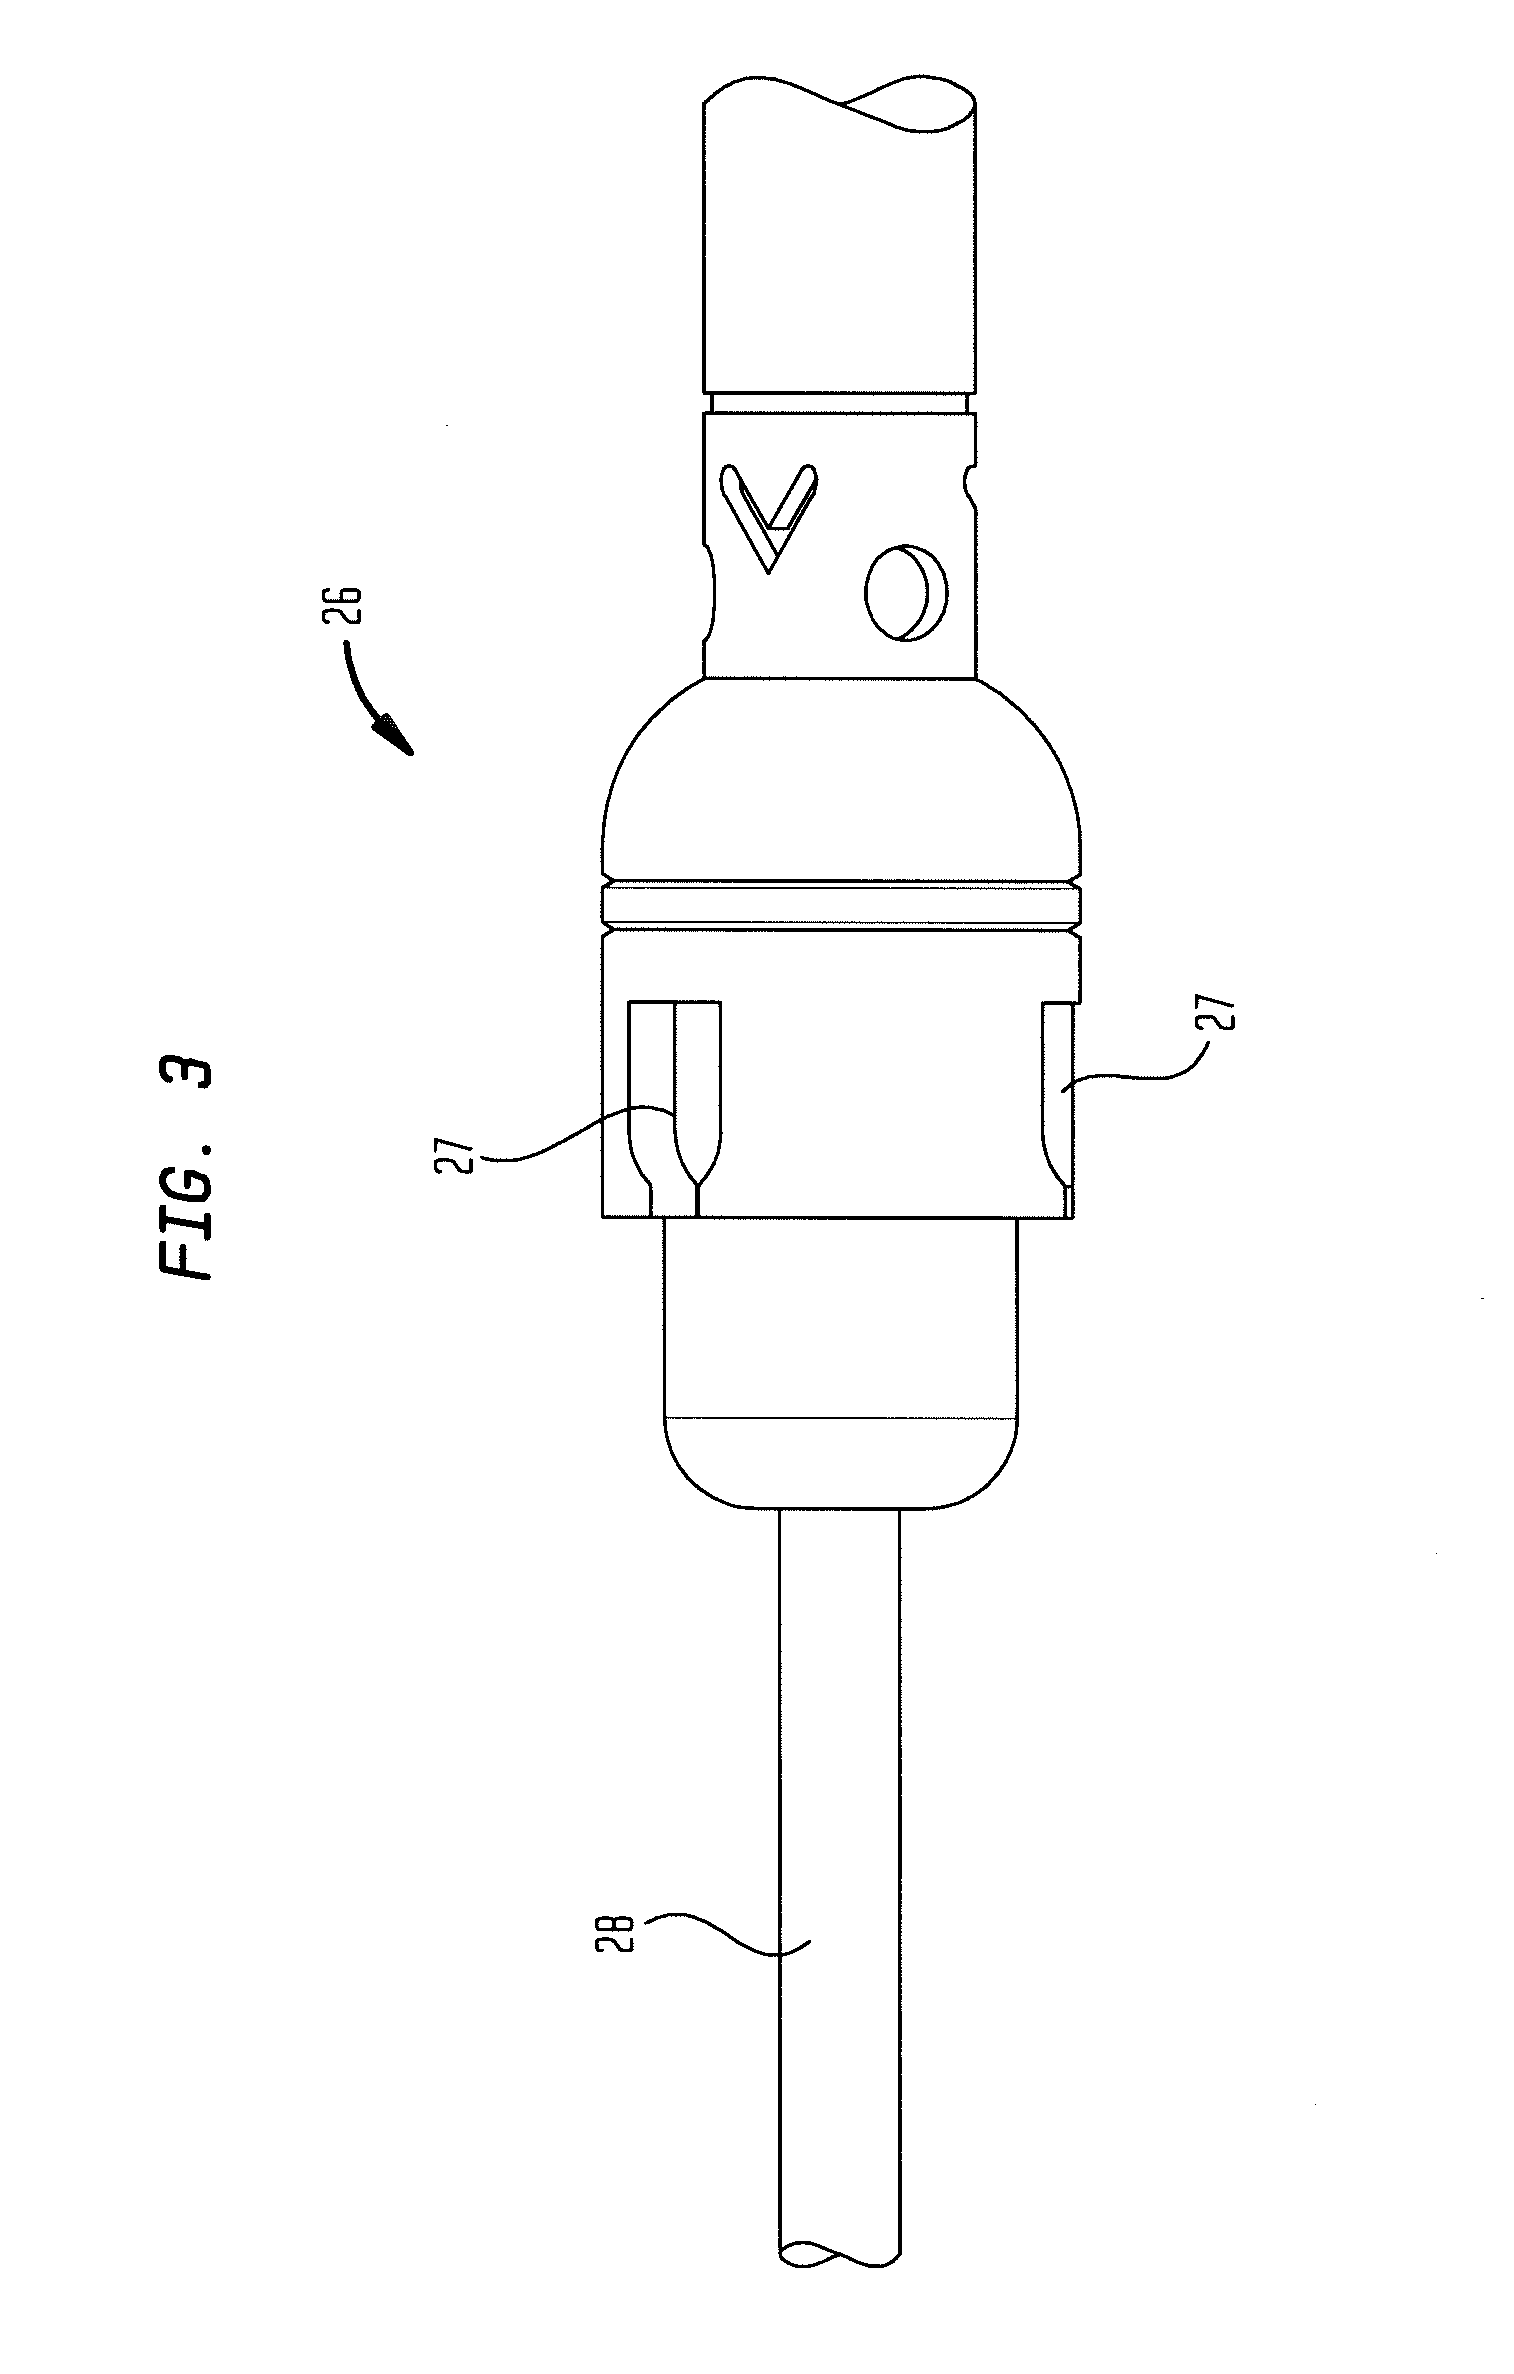 System for loading a collapsible heart valve